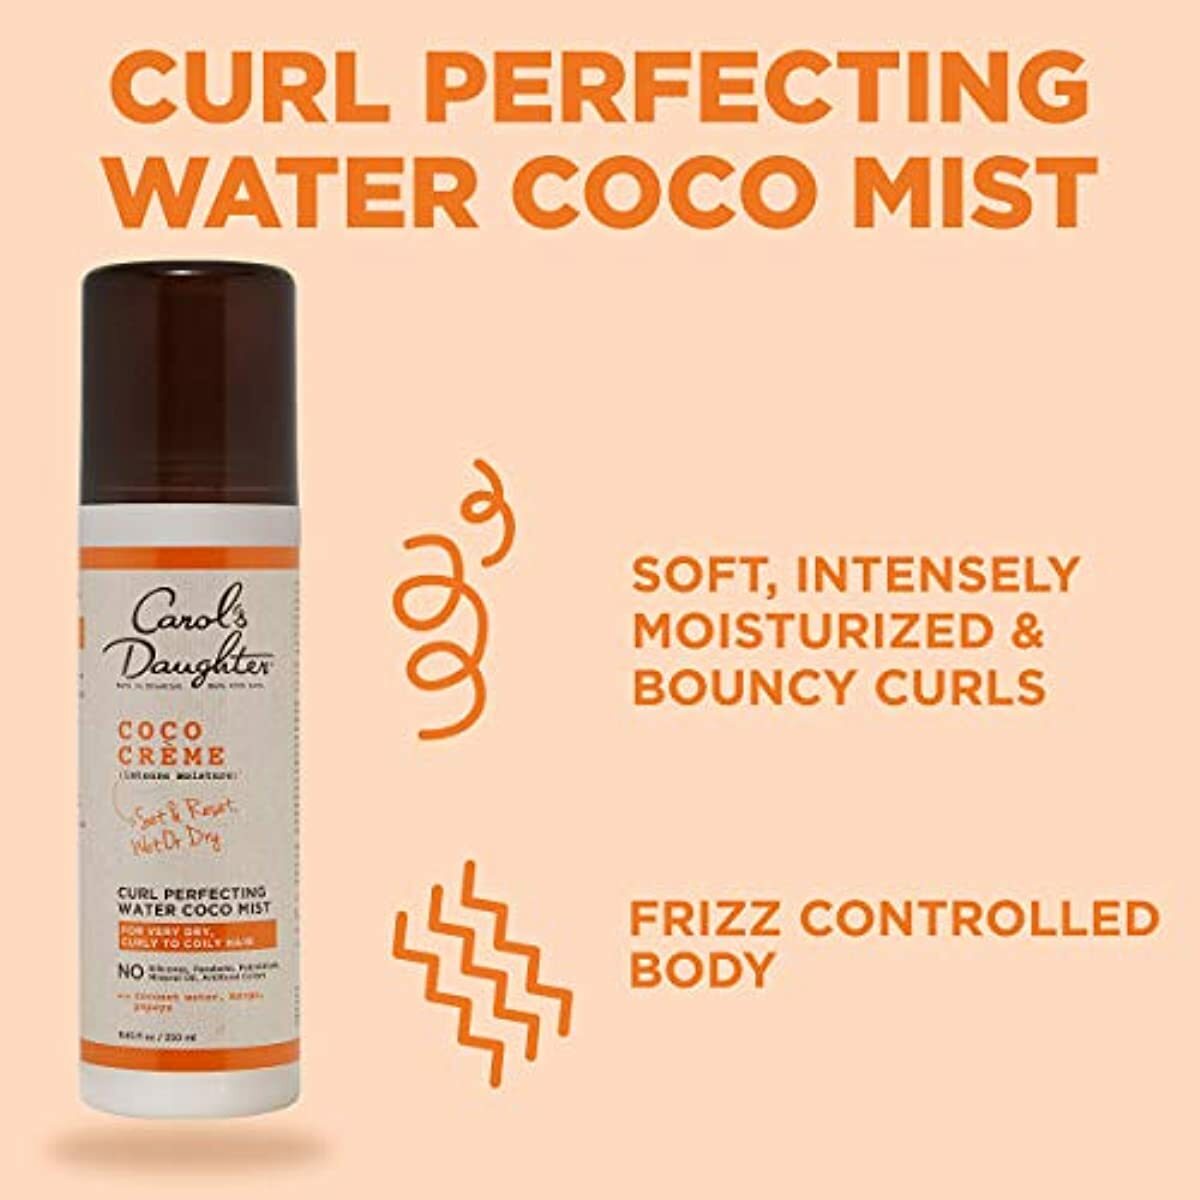 Carol’s Daughter Coco Creme Curl Perfecting Water Coco Mist, with Coconut Water, Silicone Free Curl Refresher Spray, Paraben Free Curl Activating Mist for Very Dry, Curly To Coily Hair, 5, 8.4 Fl Oz